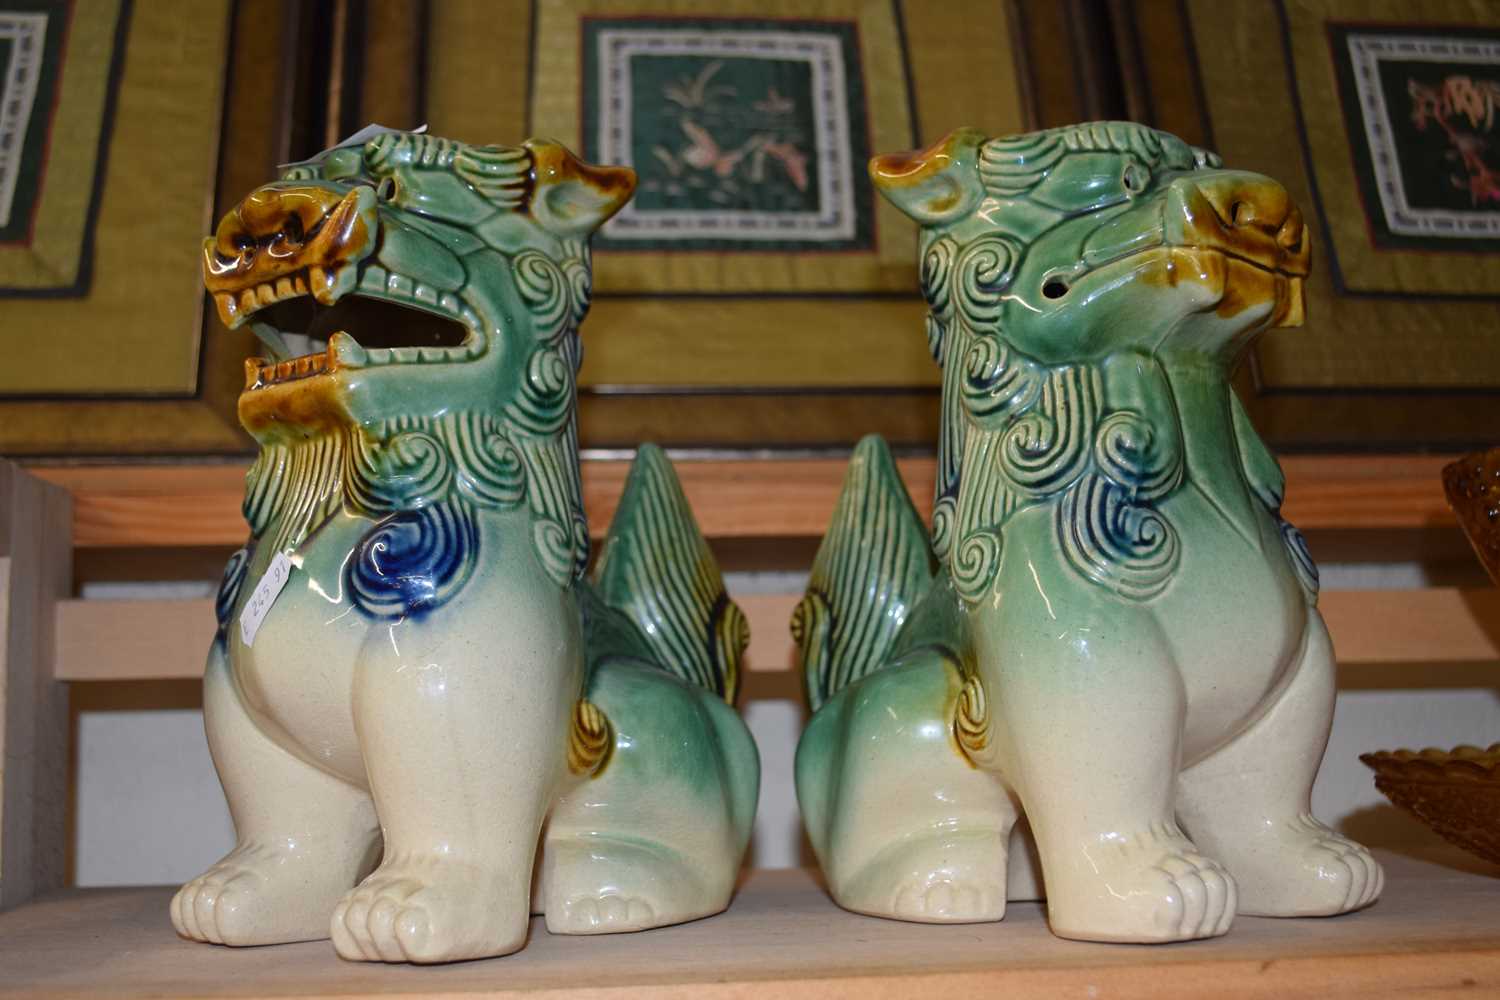 Pair of modern Chinese Foo dogs and various pressed amber glass items